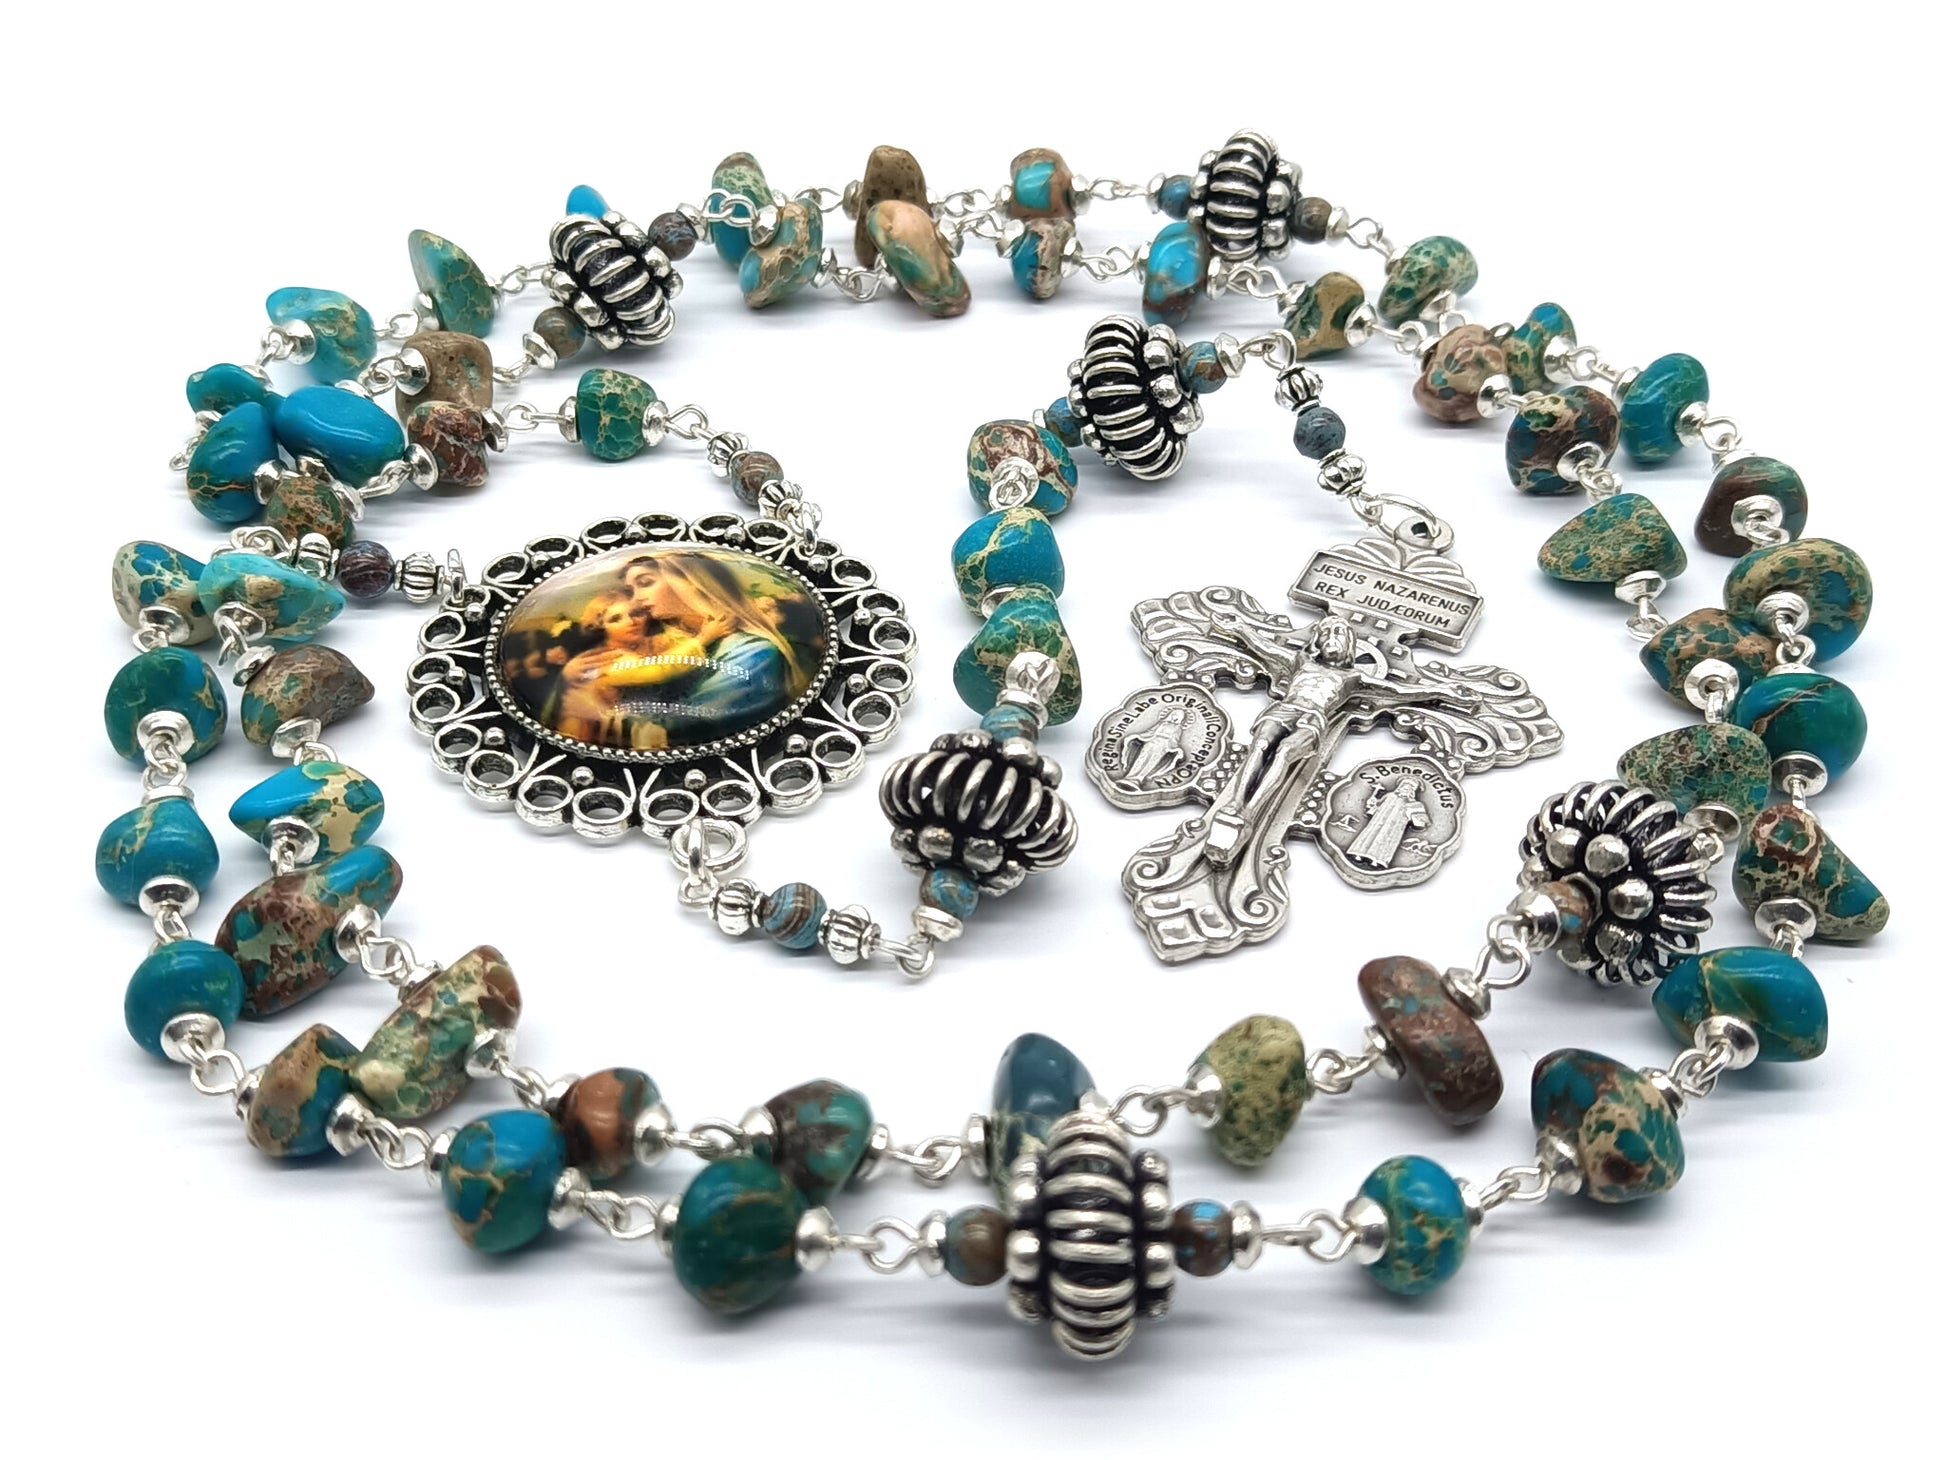 Virgin and Child unique rosary beads with jasper gemstone beads, silver Pardon crucifix, silver pater beads, bead caps and picture centre medal.